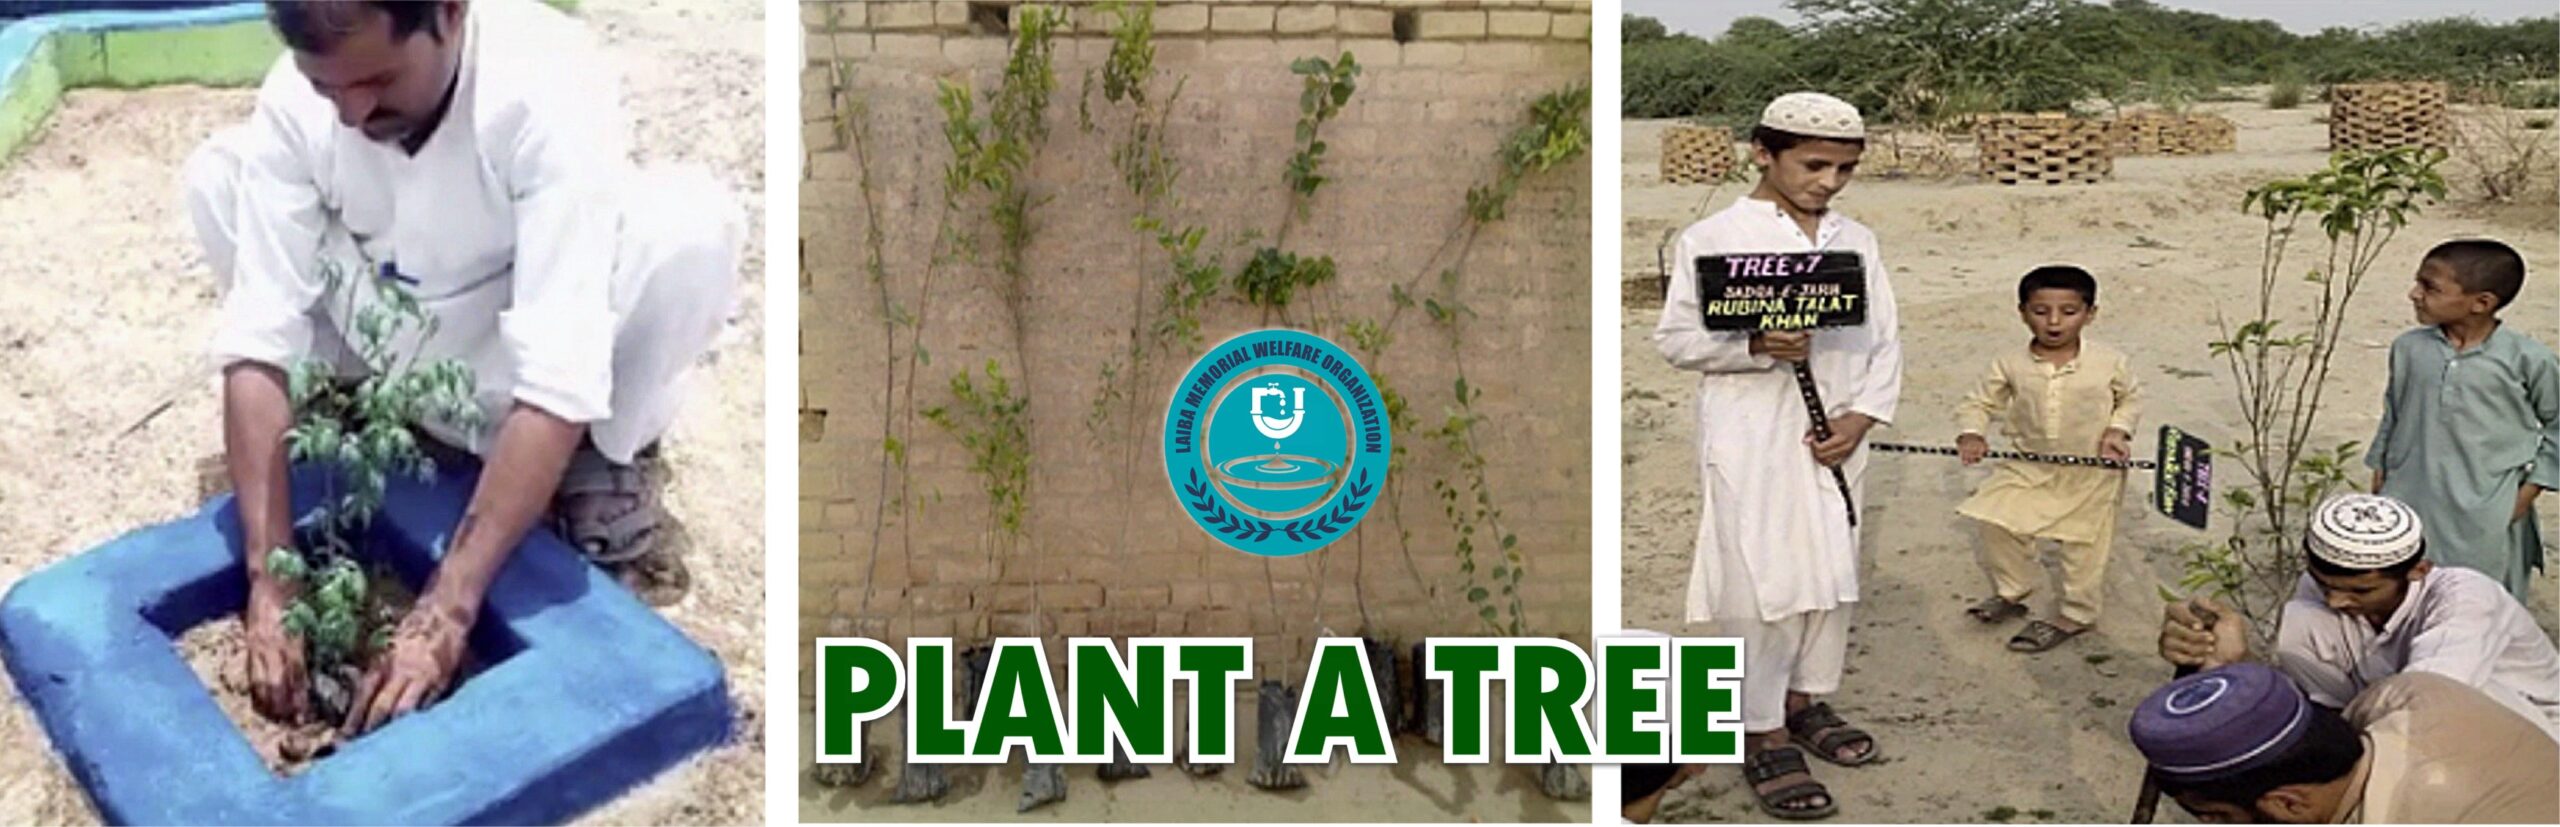 plant a tree banner